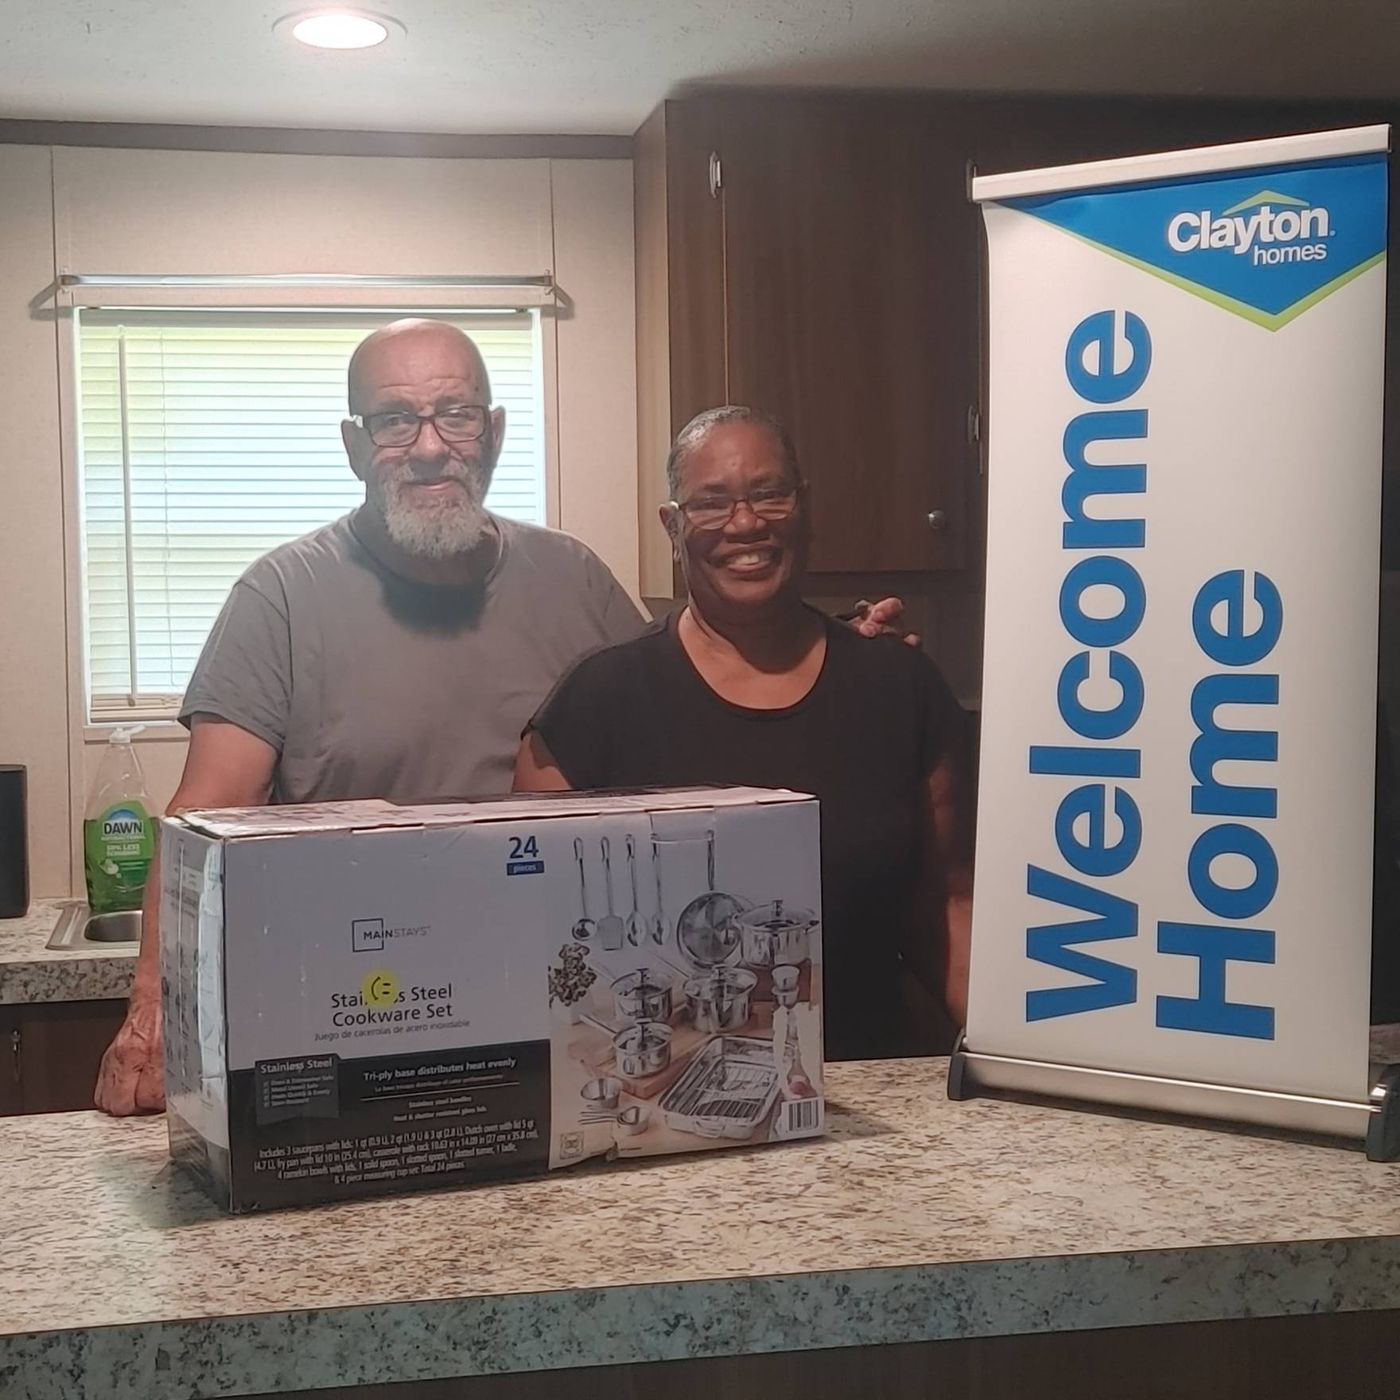 GWENDOLYN J. welcome home image